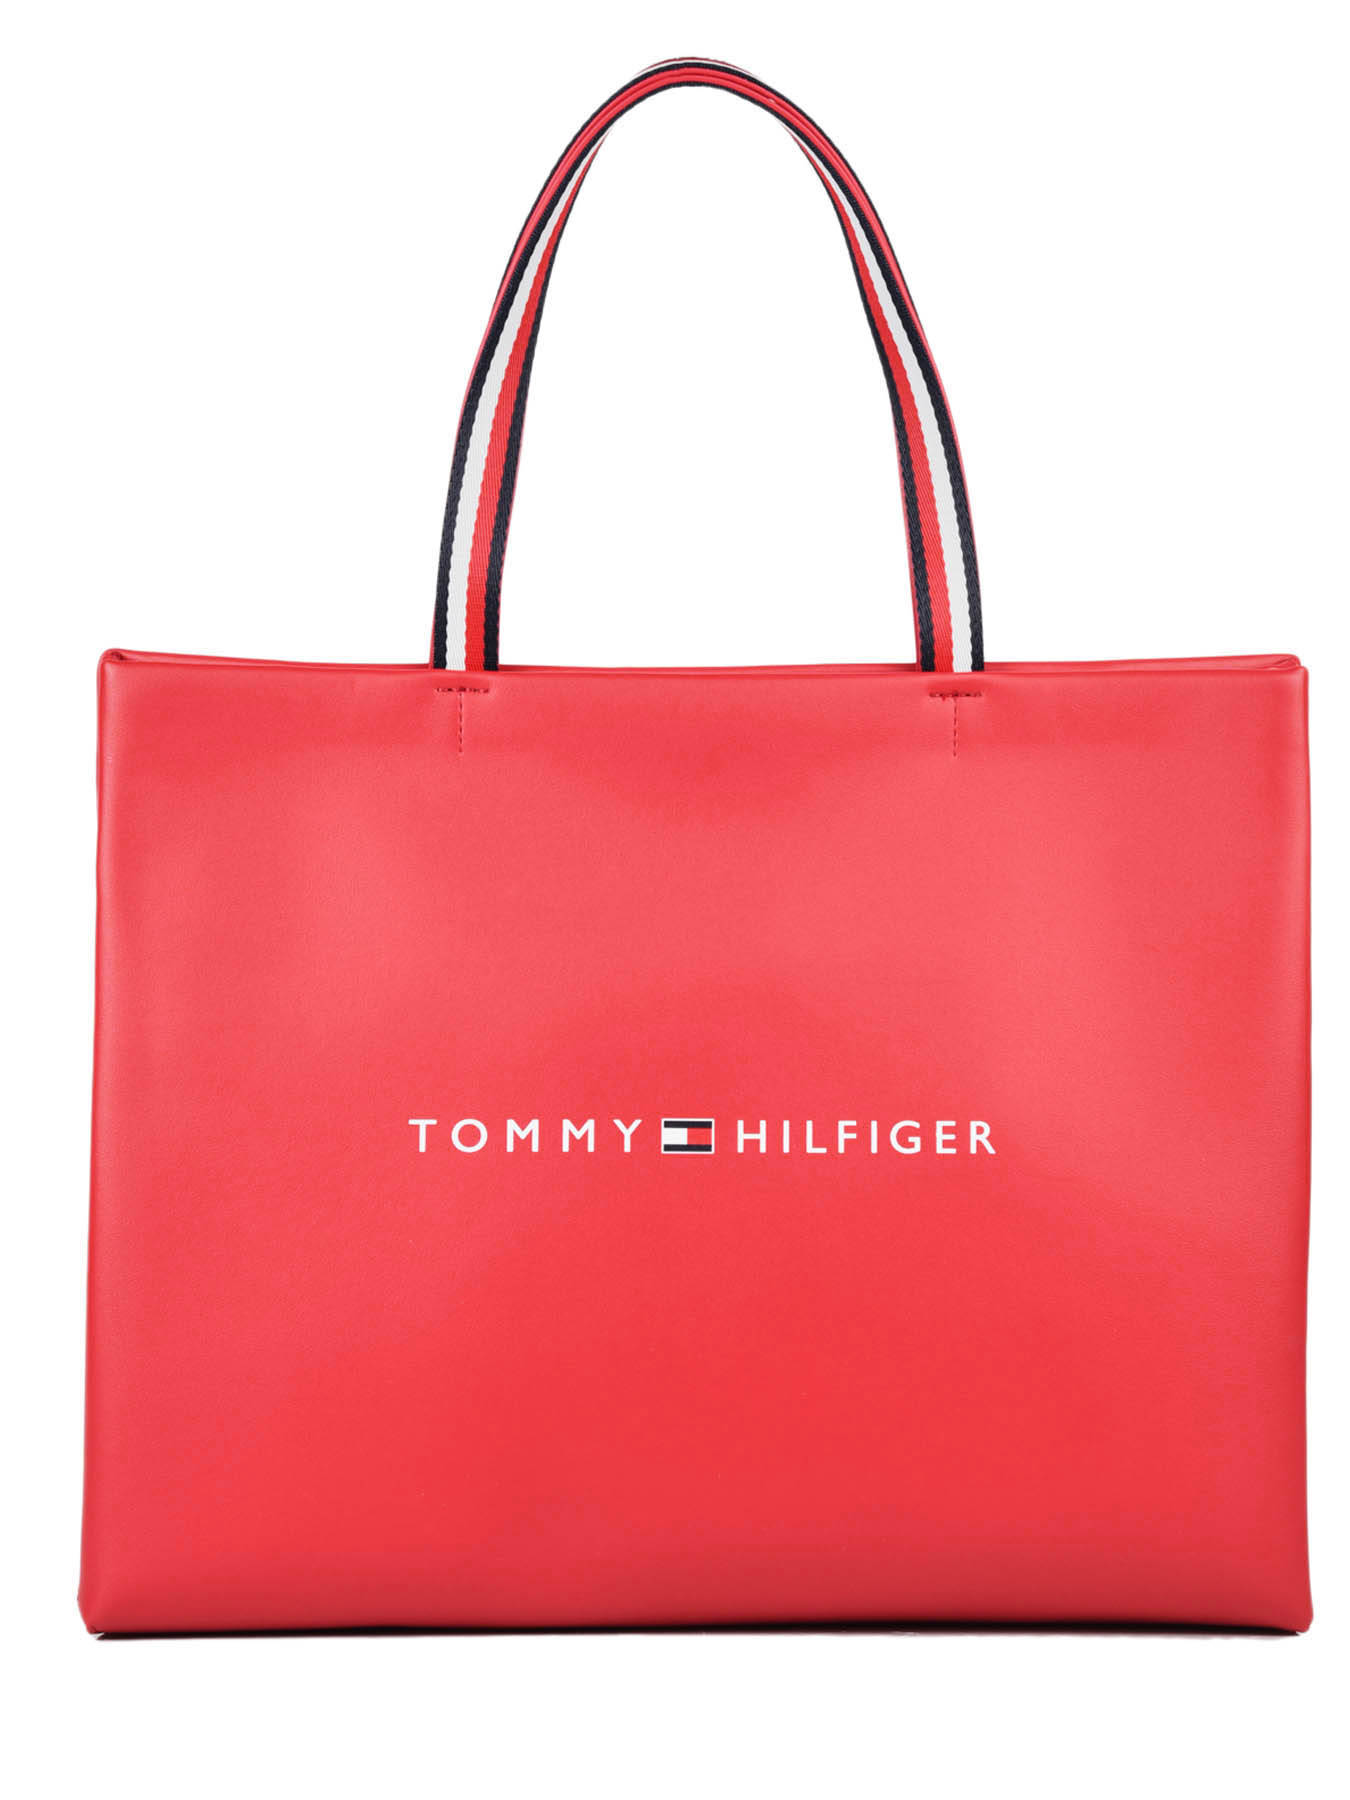 tommy hilfiger shopping bags